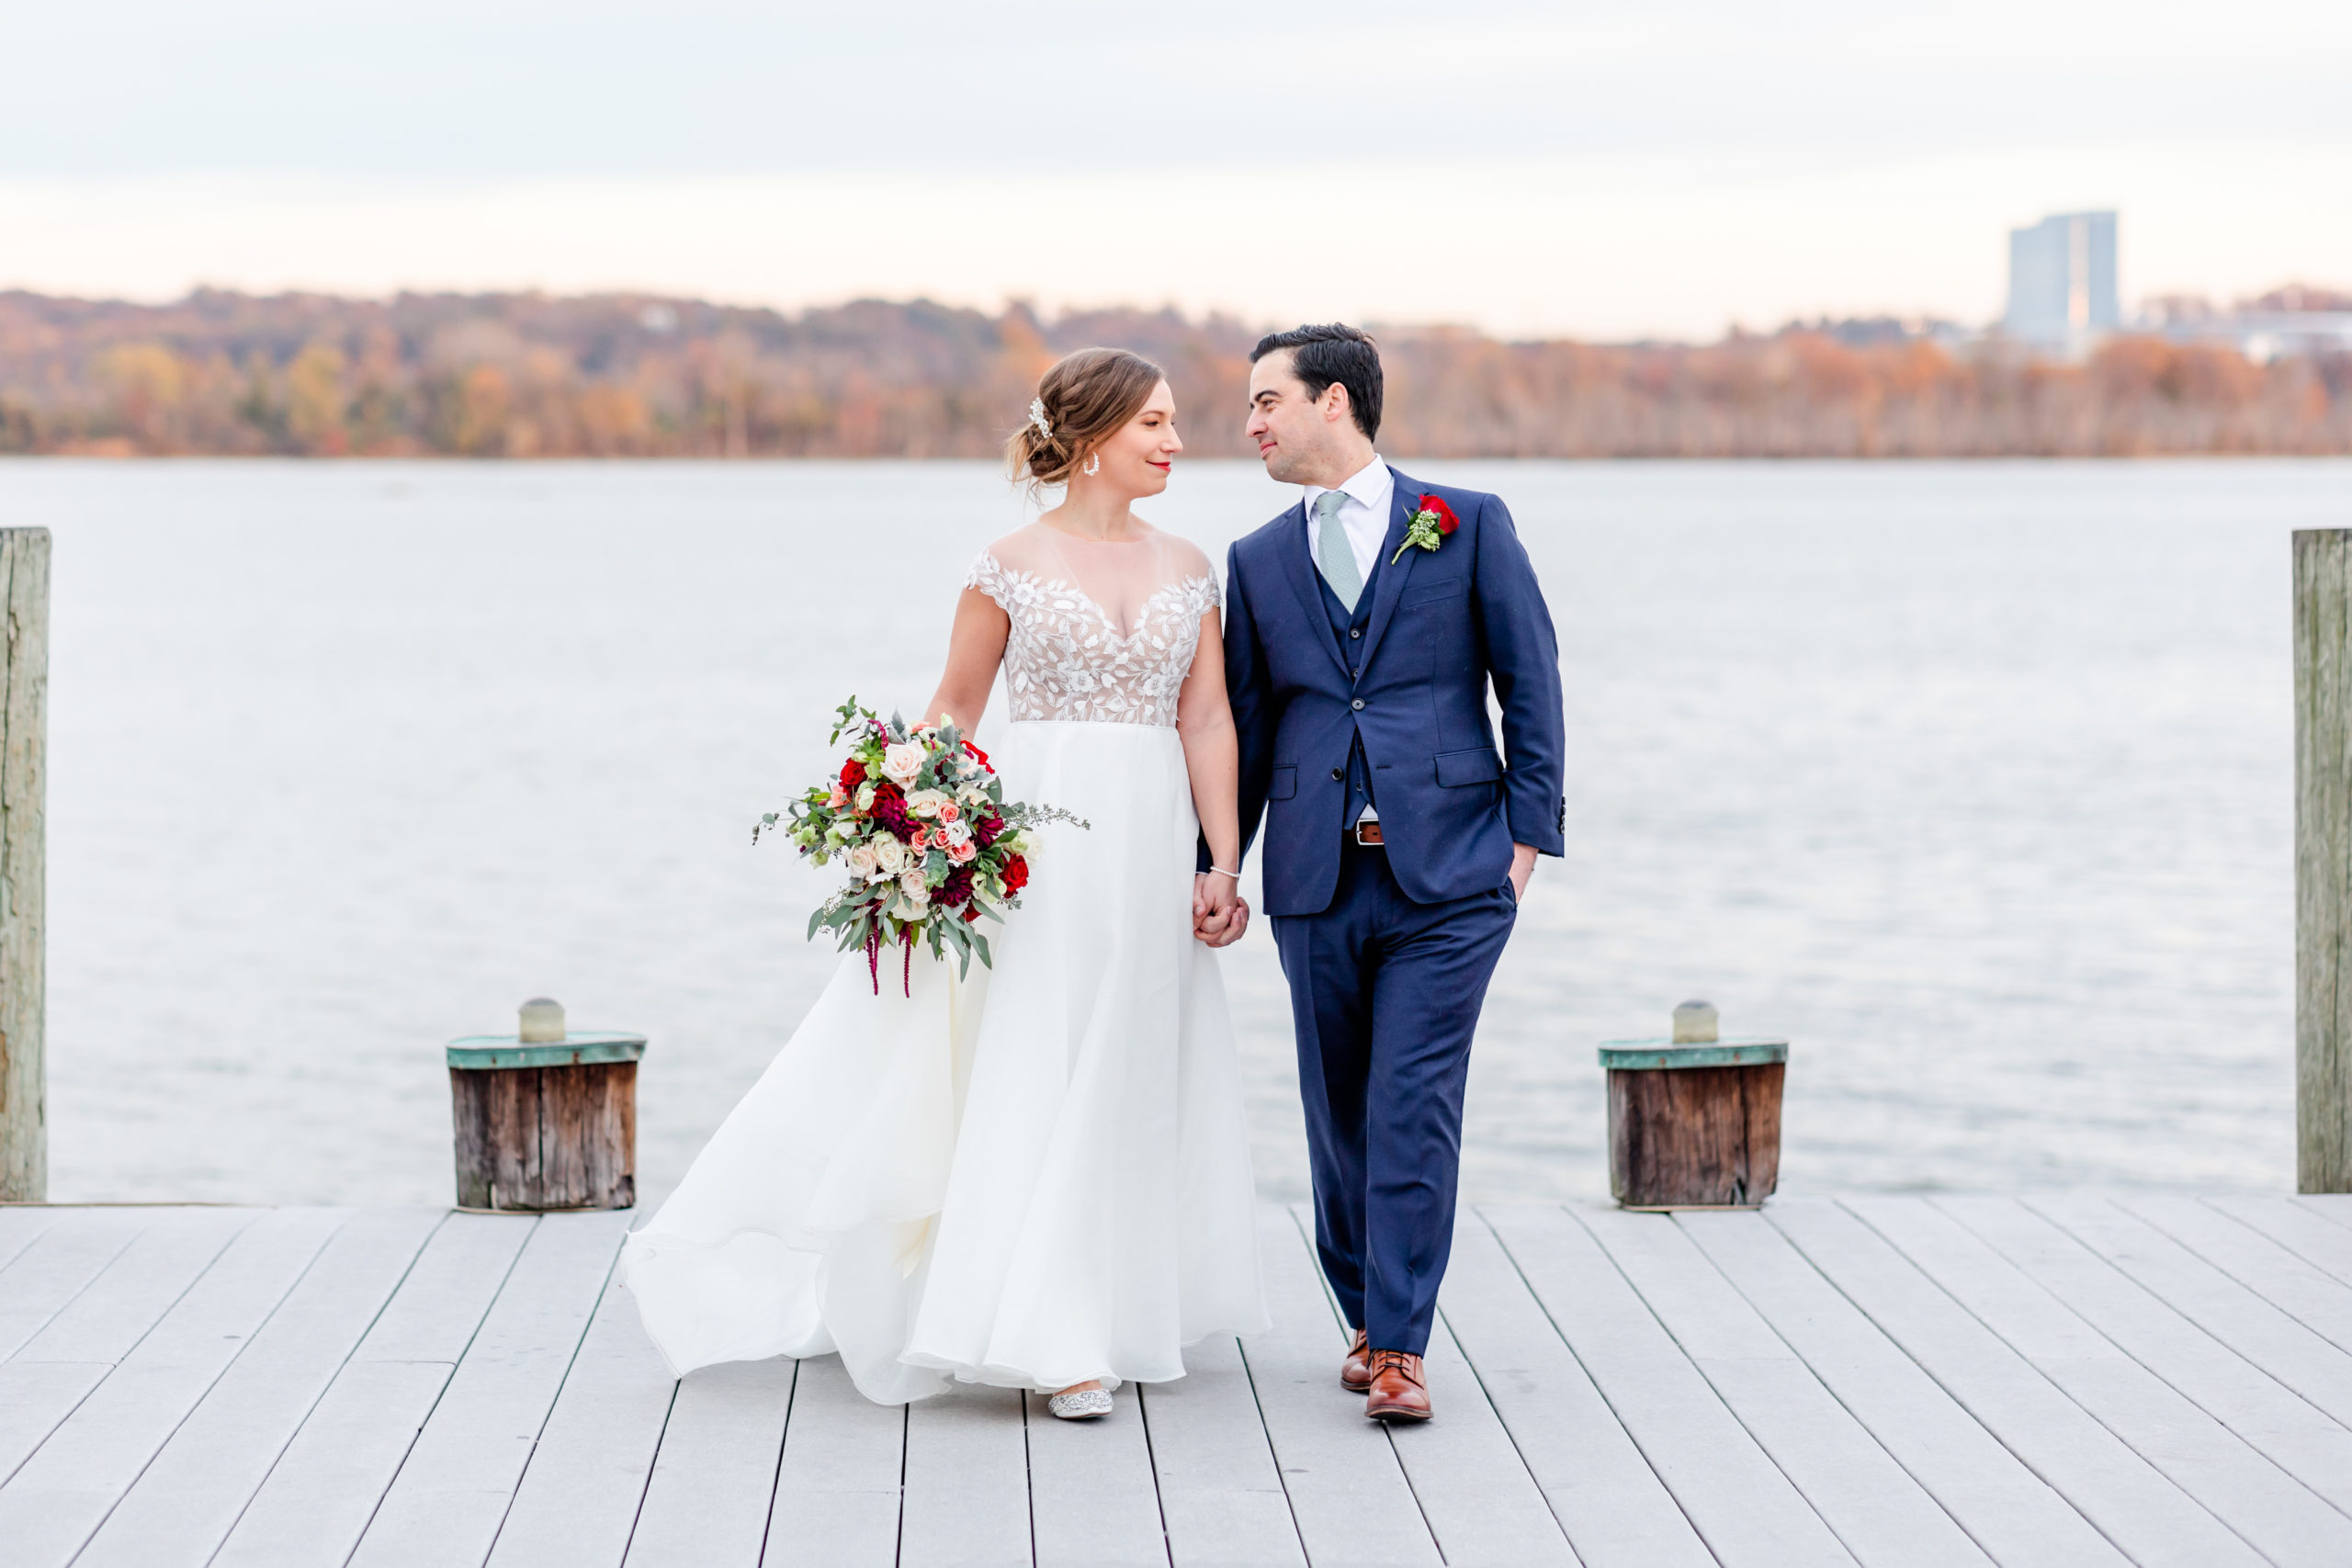 Lorien Alexandria winter wedding, Old Town Alexandria wedding, Alexandria Virginia wedding, DC micro wedding, northern Virginia wedding photographer, Alexandria Virginia wedding photographer, DC wedding photographer, winter wedding aesthetic, Rachel E.H. Photography, bride and groom holding hands on dock, Alexandria waterfront